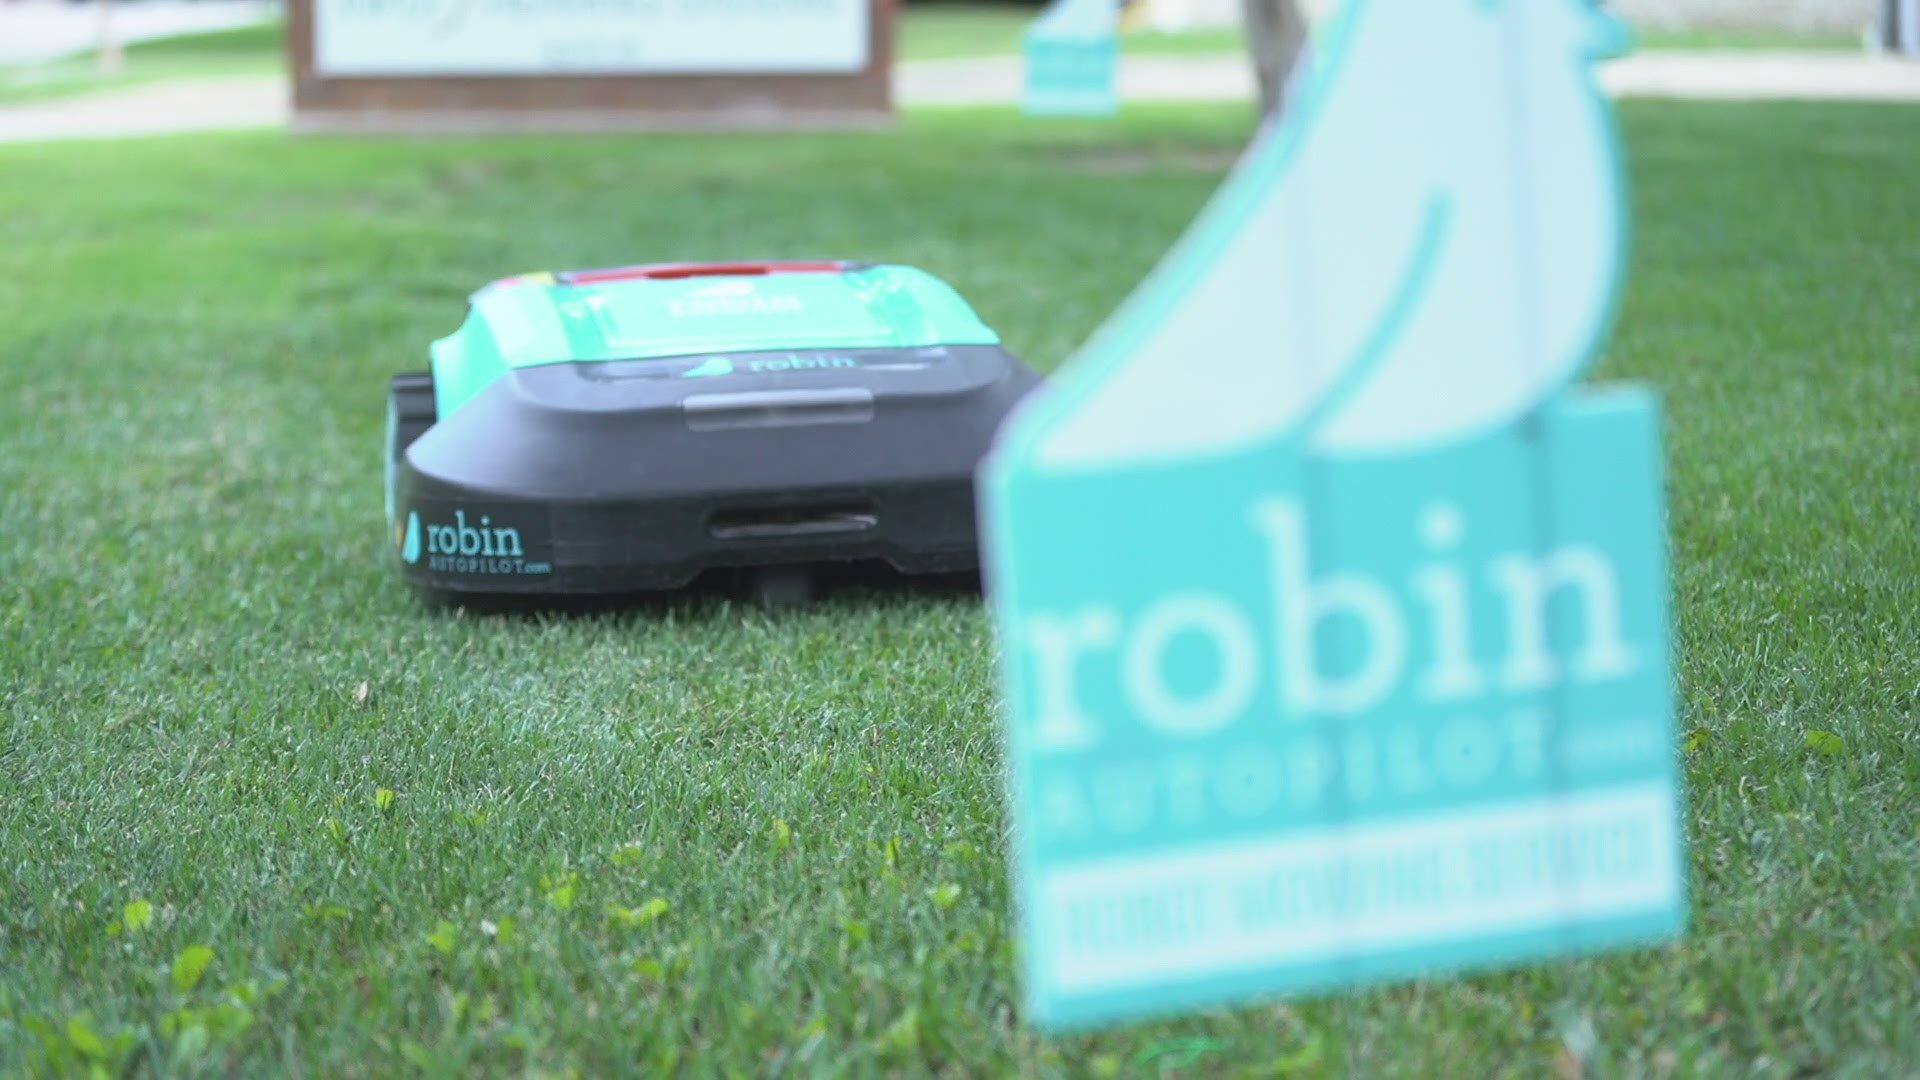 Get to know Dallas-based Robin Autopilot, the world's first robotic lawn care service. WFAA.com